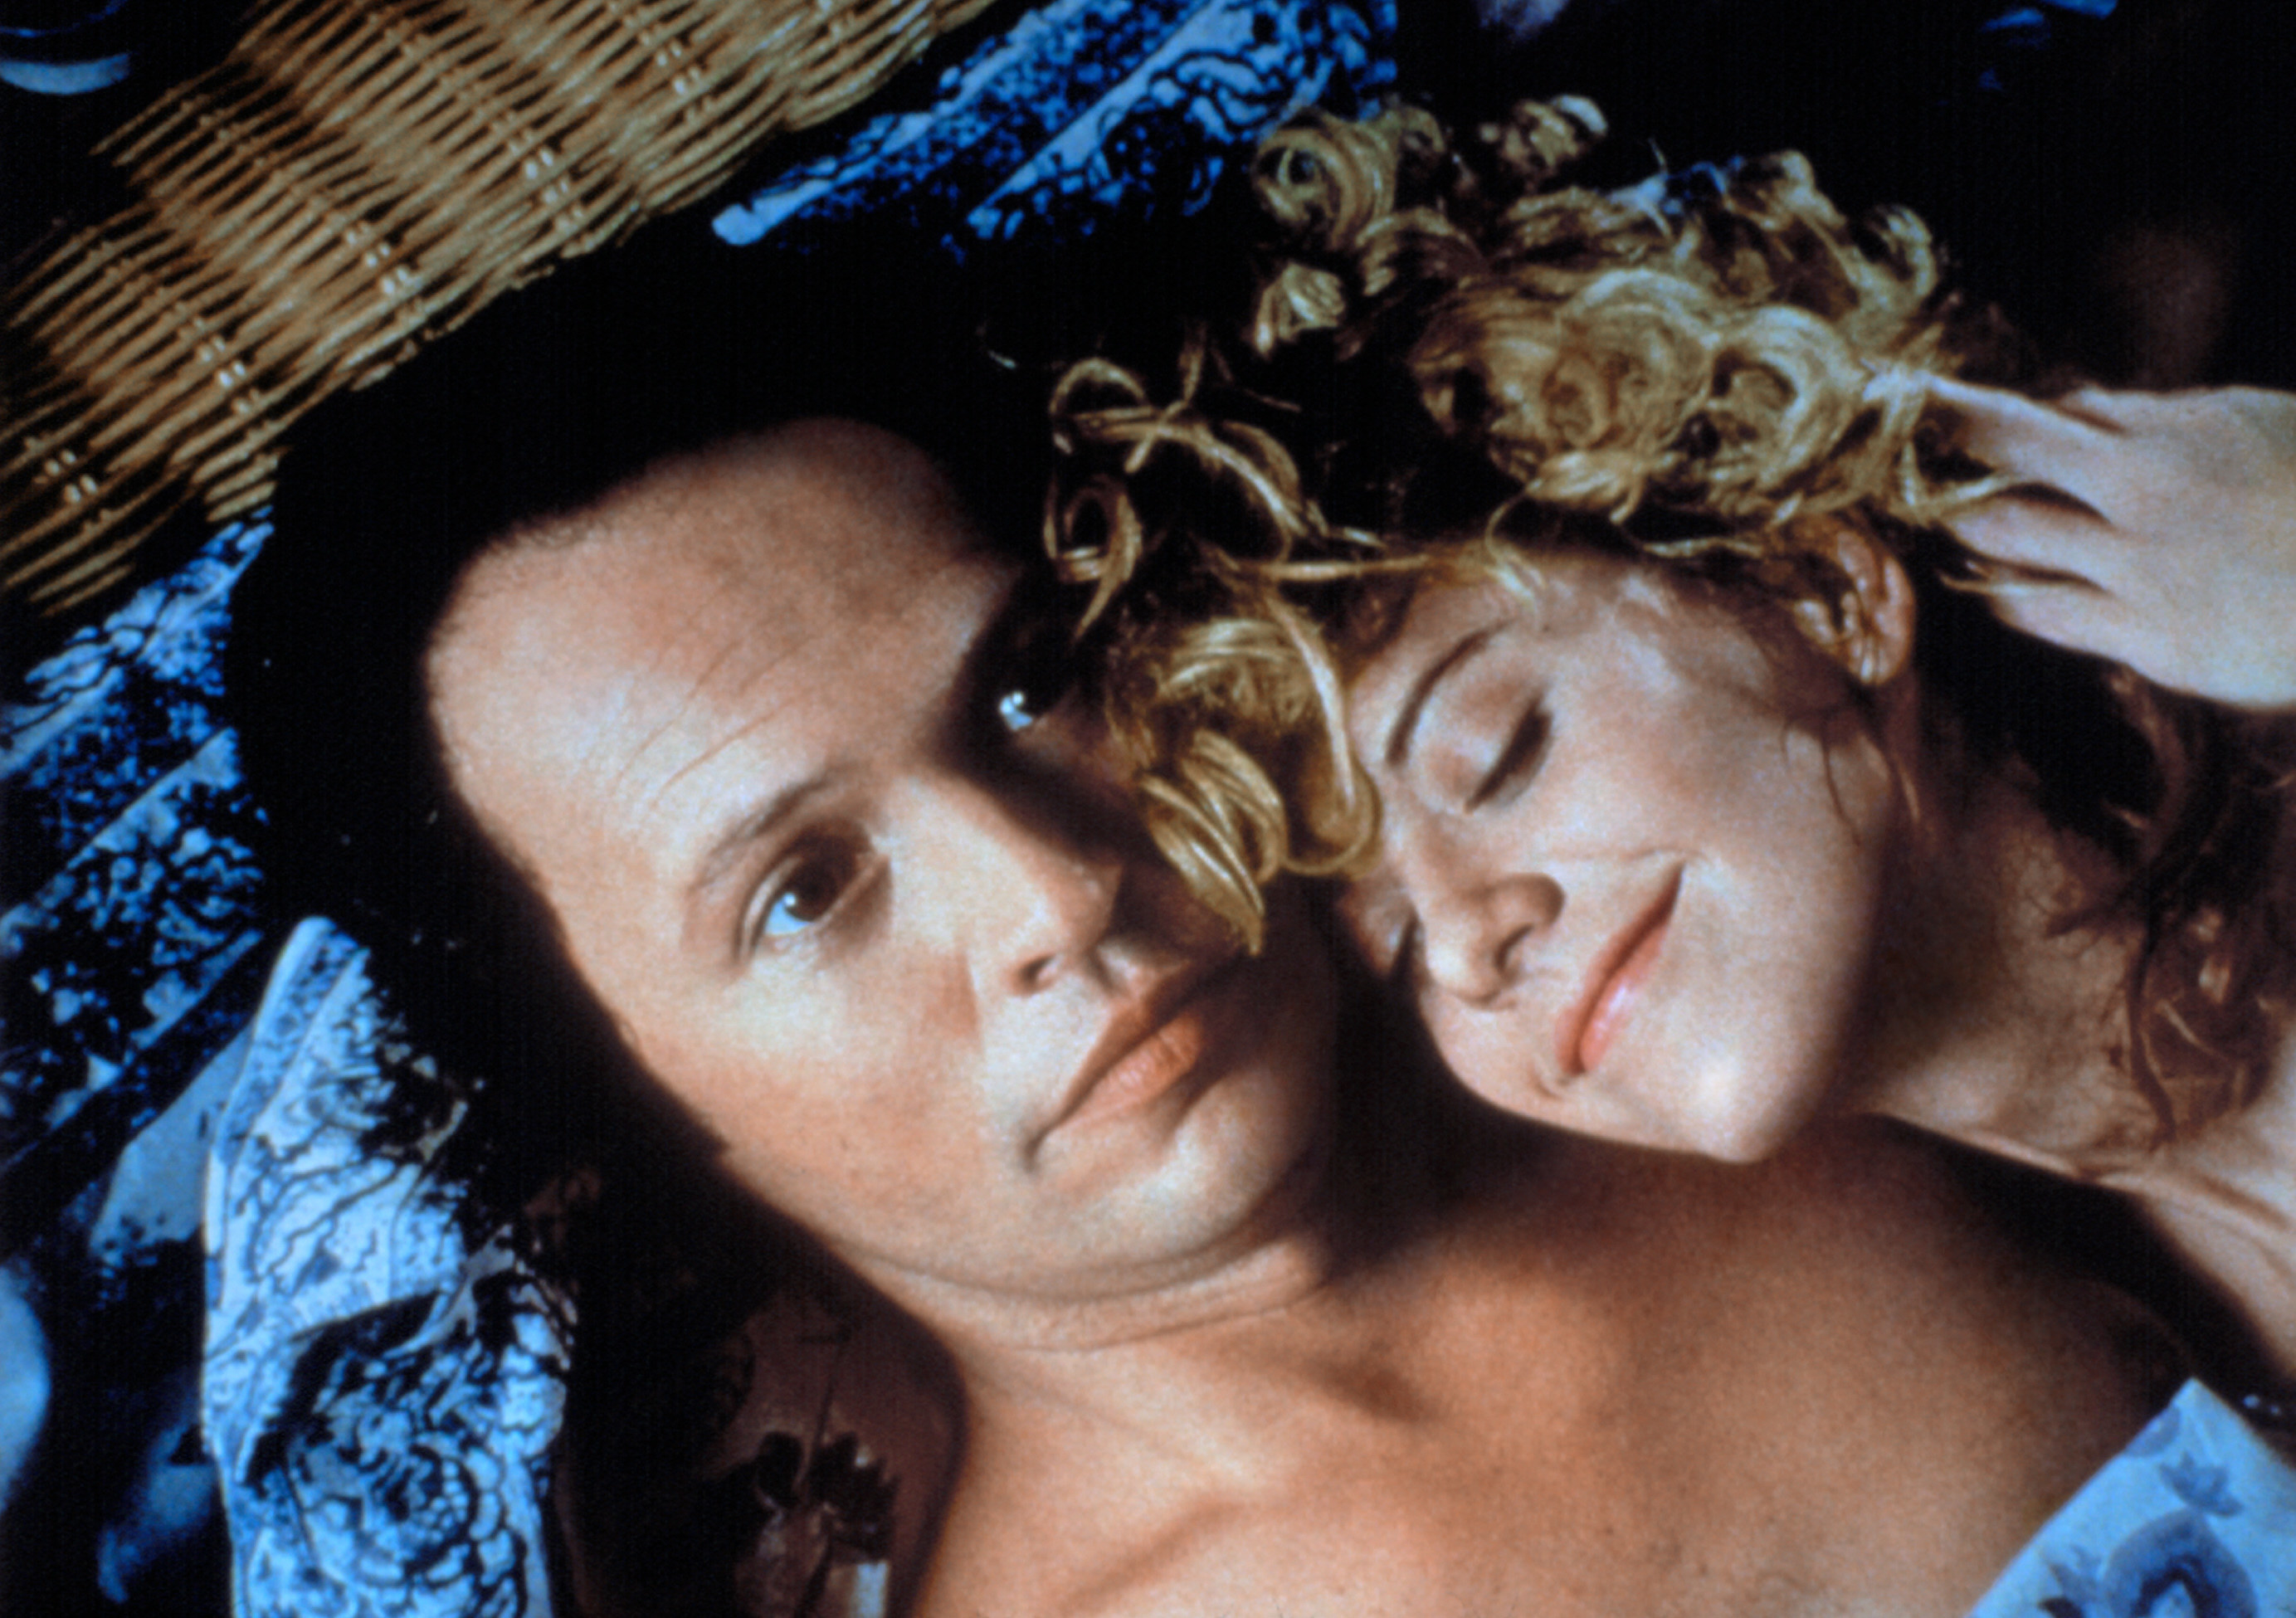 Harry and Sally lying in bed together